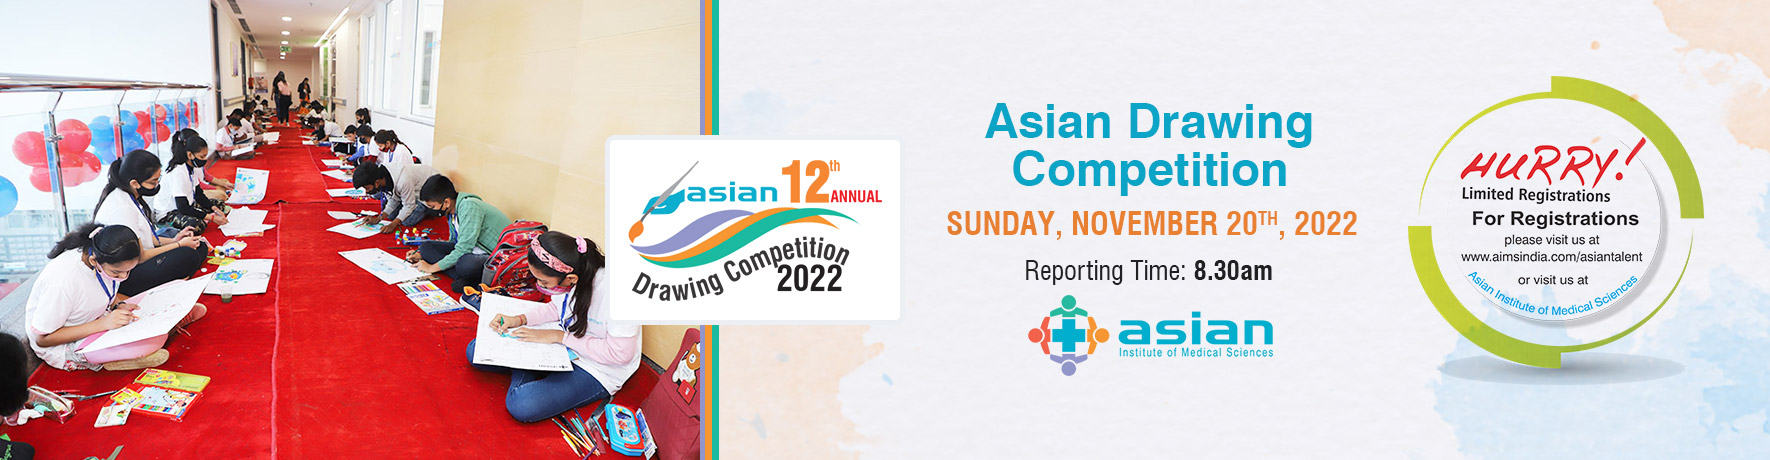 Asian Drawing Competition